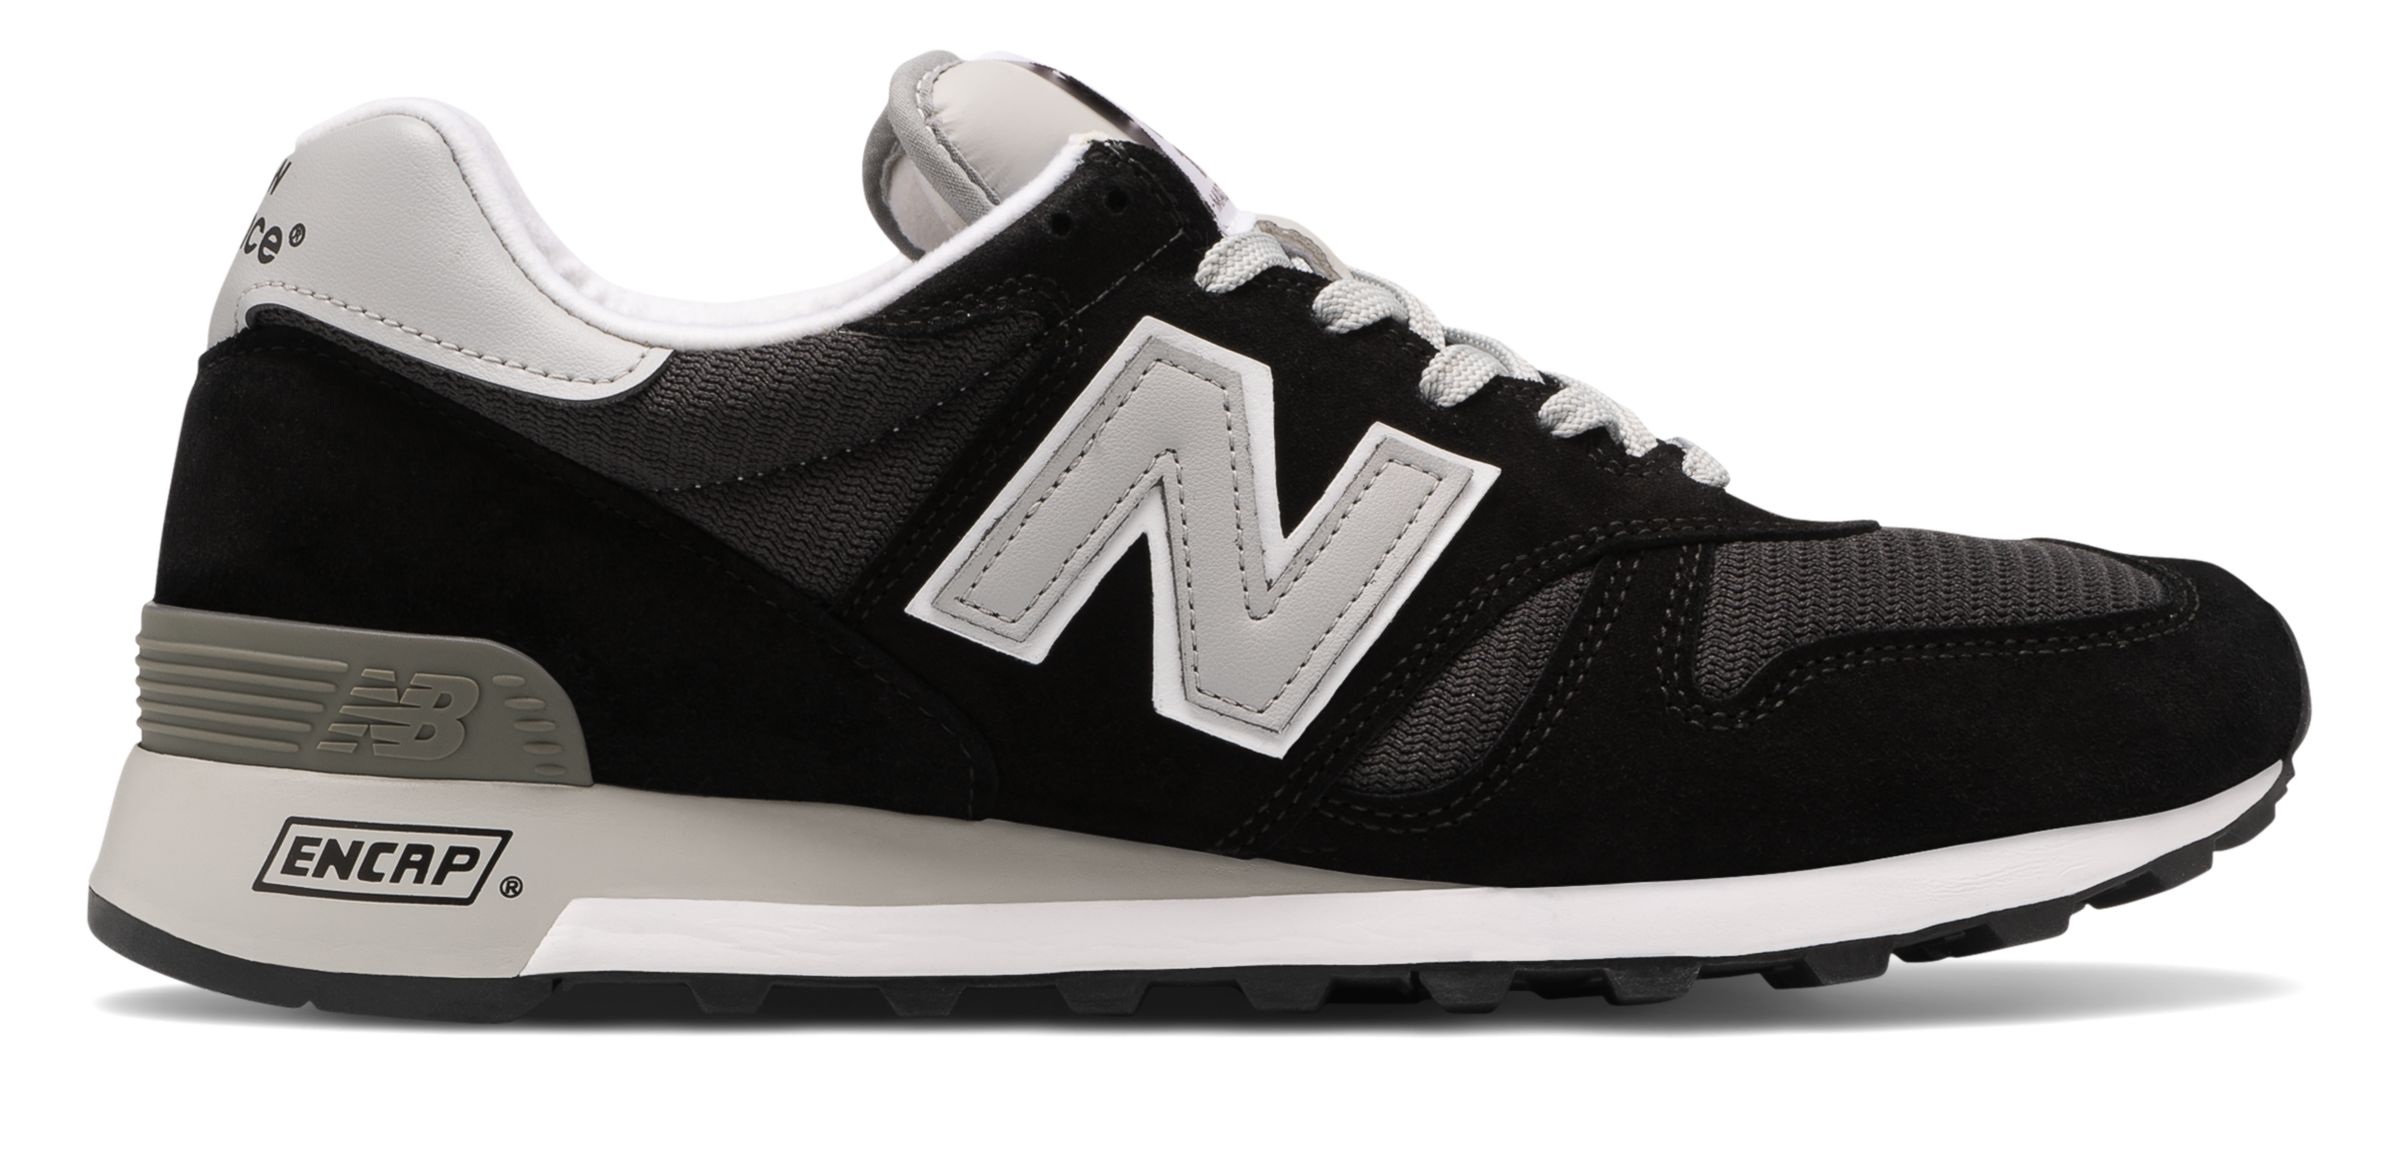 Men's Made in US 1300 Lifestyle Shoes - New Balance